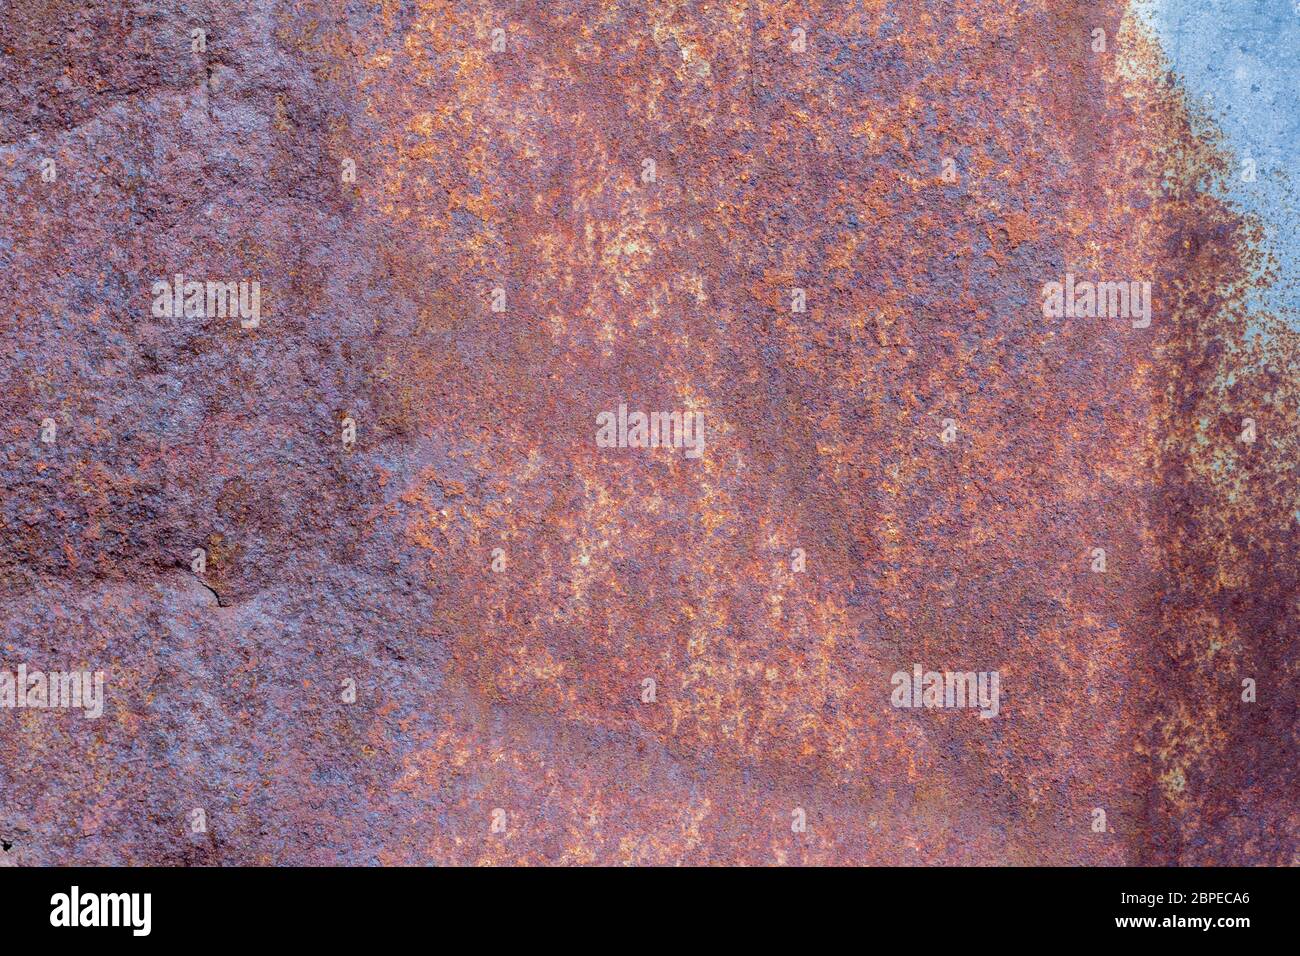 Rusty background.Rust.Texture of old rusty iron.Red-brown rust covered the metal. Stock Photo